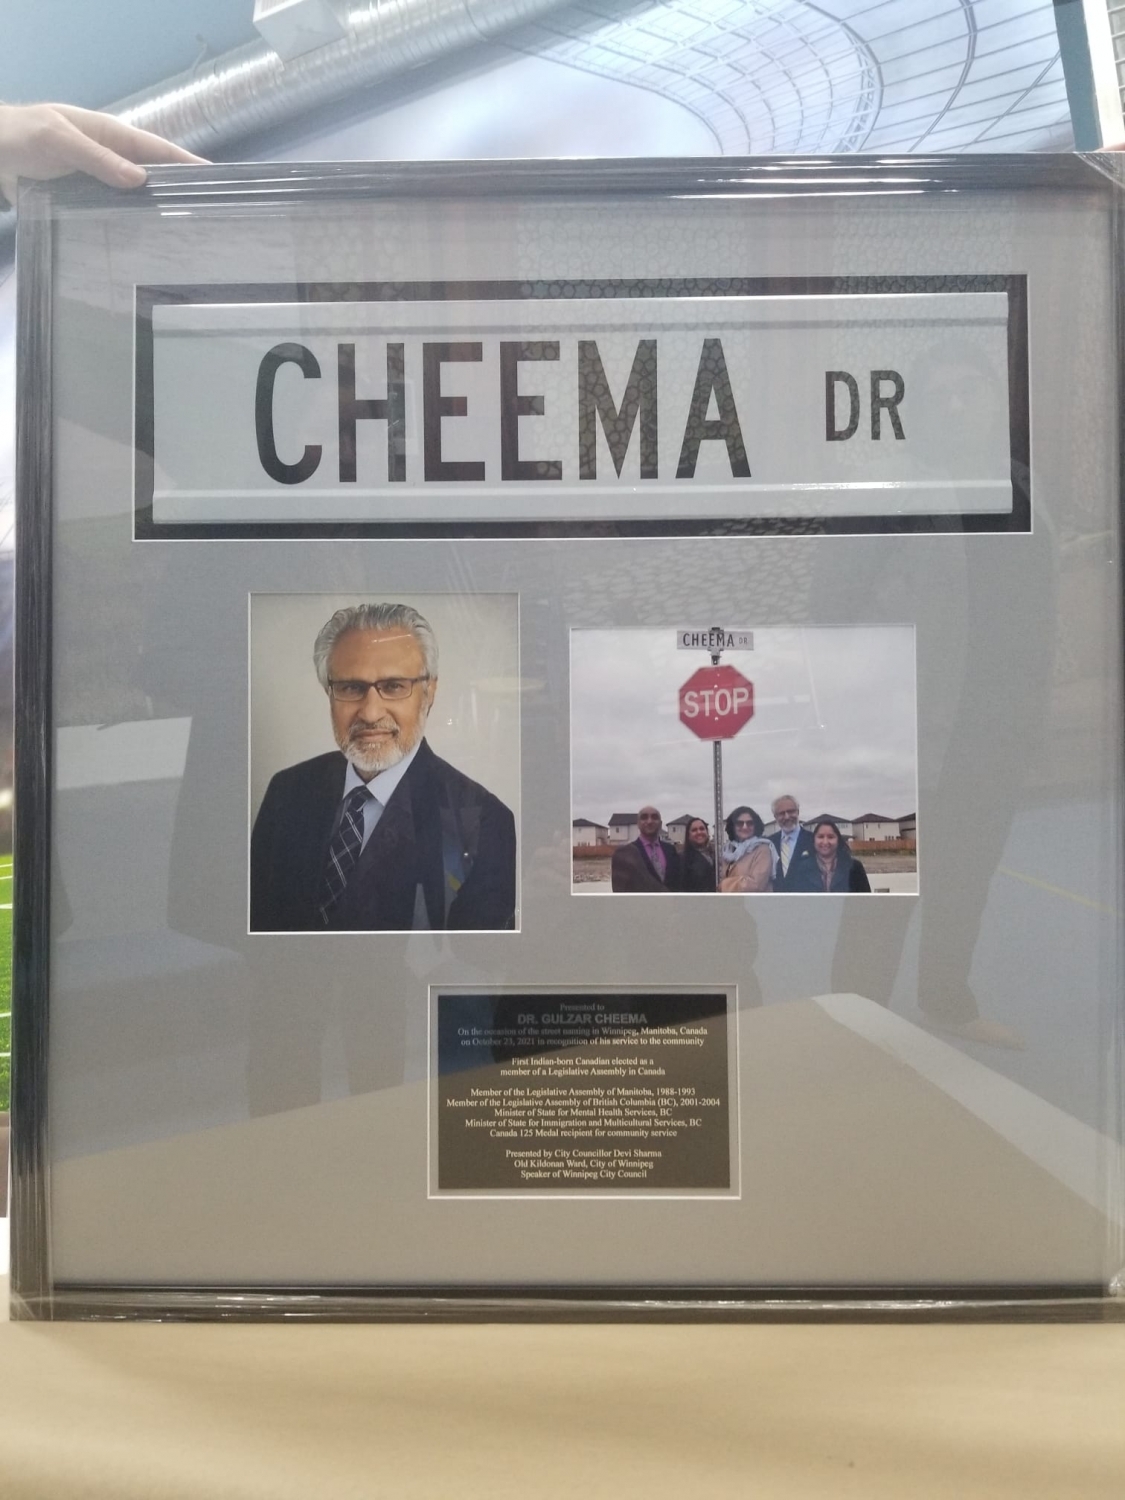 Canadian street named Cheema Drive after Indian-born doctor